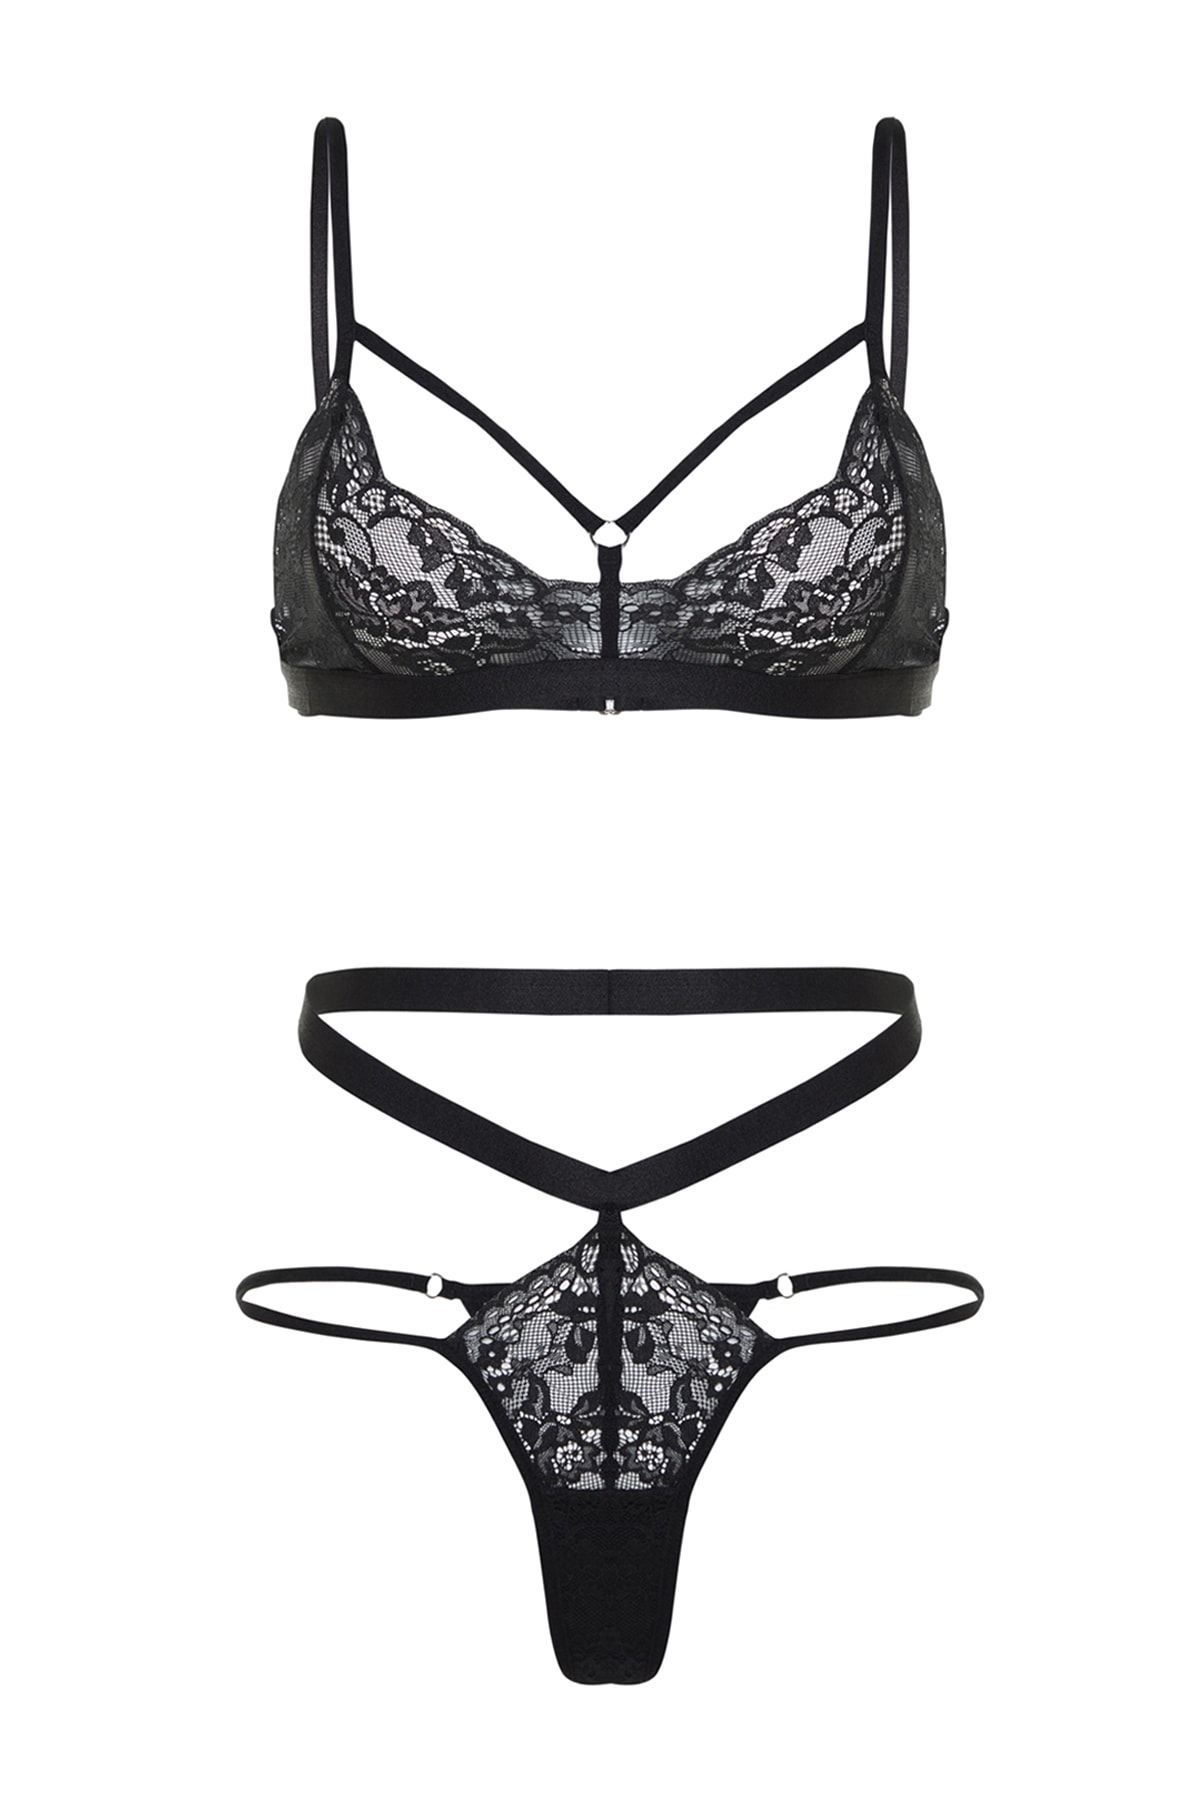 Trendyol Collection Black Lace Cupless Lingerie Set with Removable Garter  THMAW24CC00005 - Trendyol